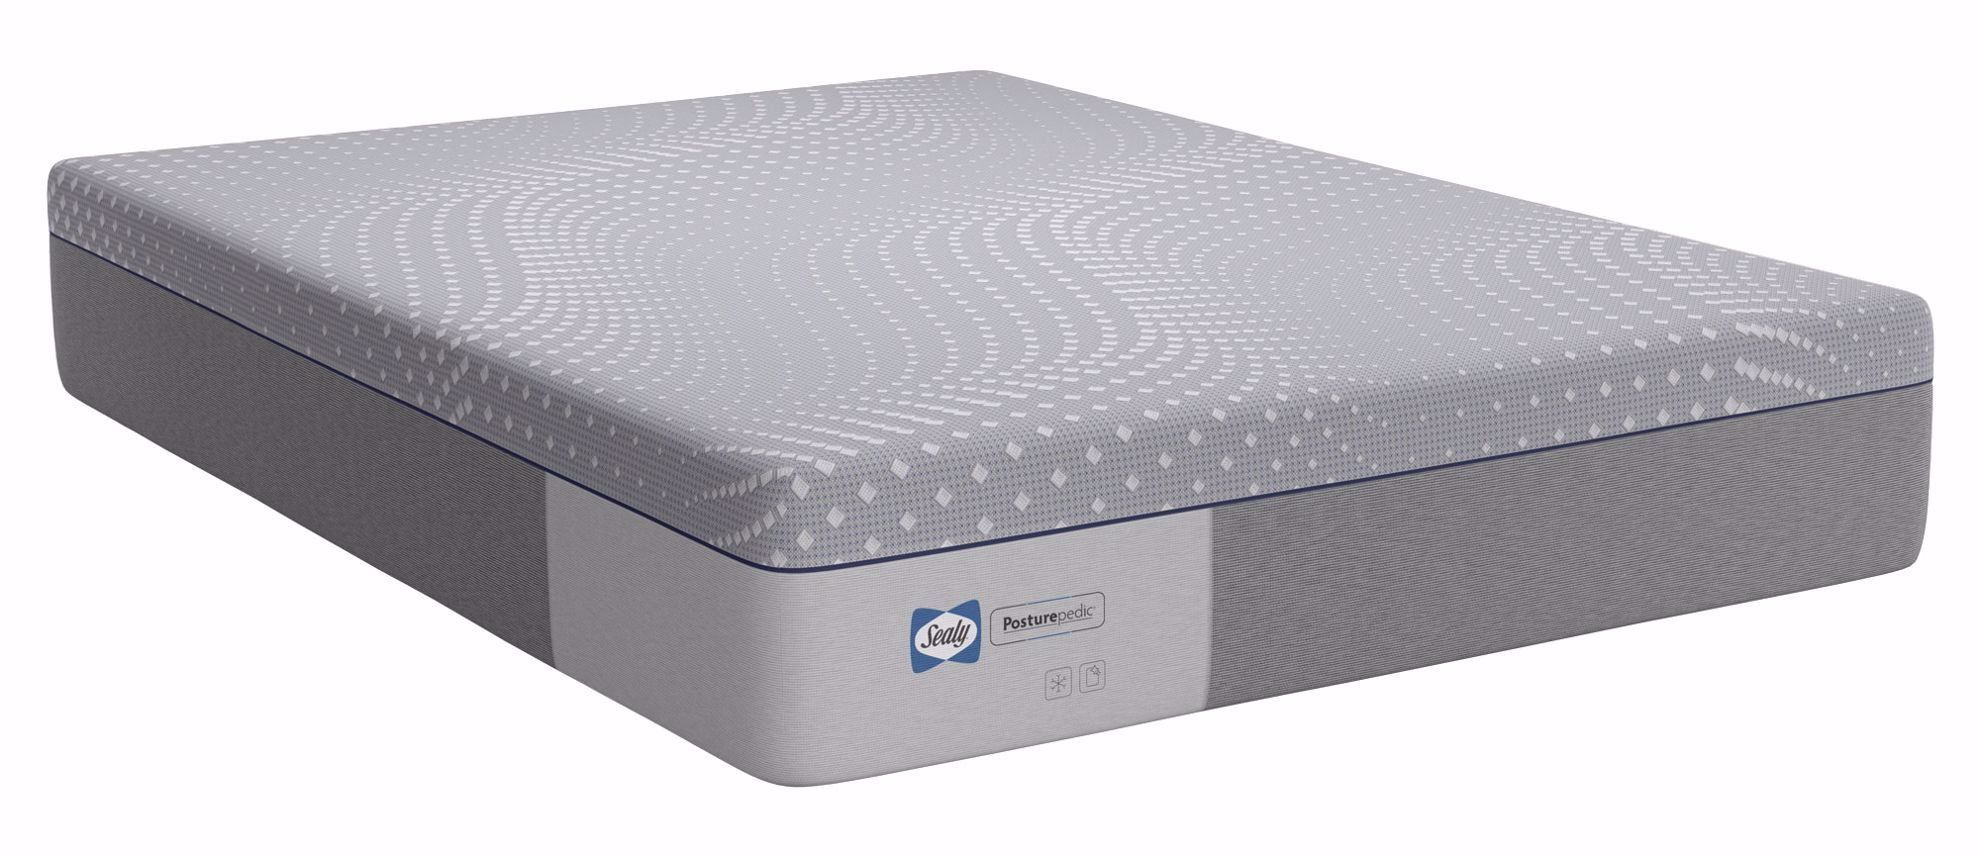 Picture of Sealy Posturpedic 13" Twin Mattress-in-a-Box